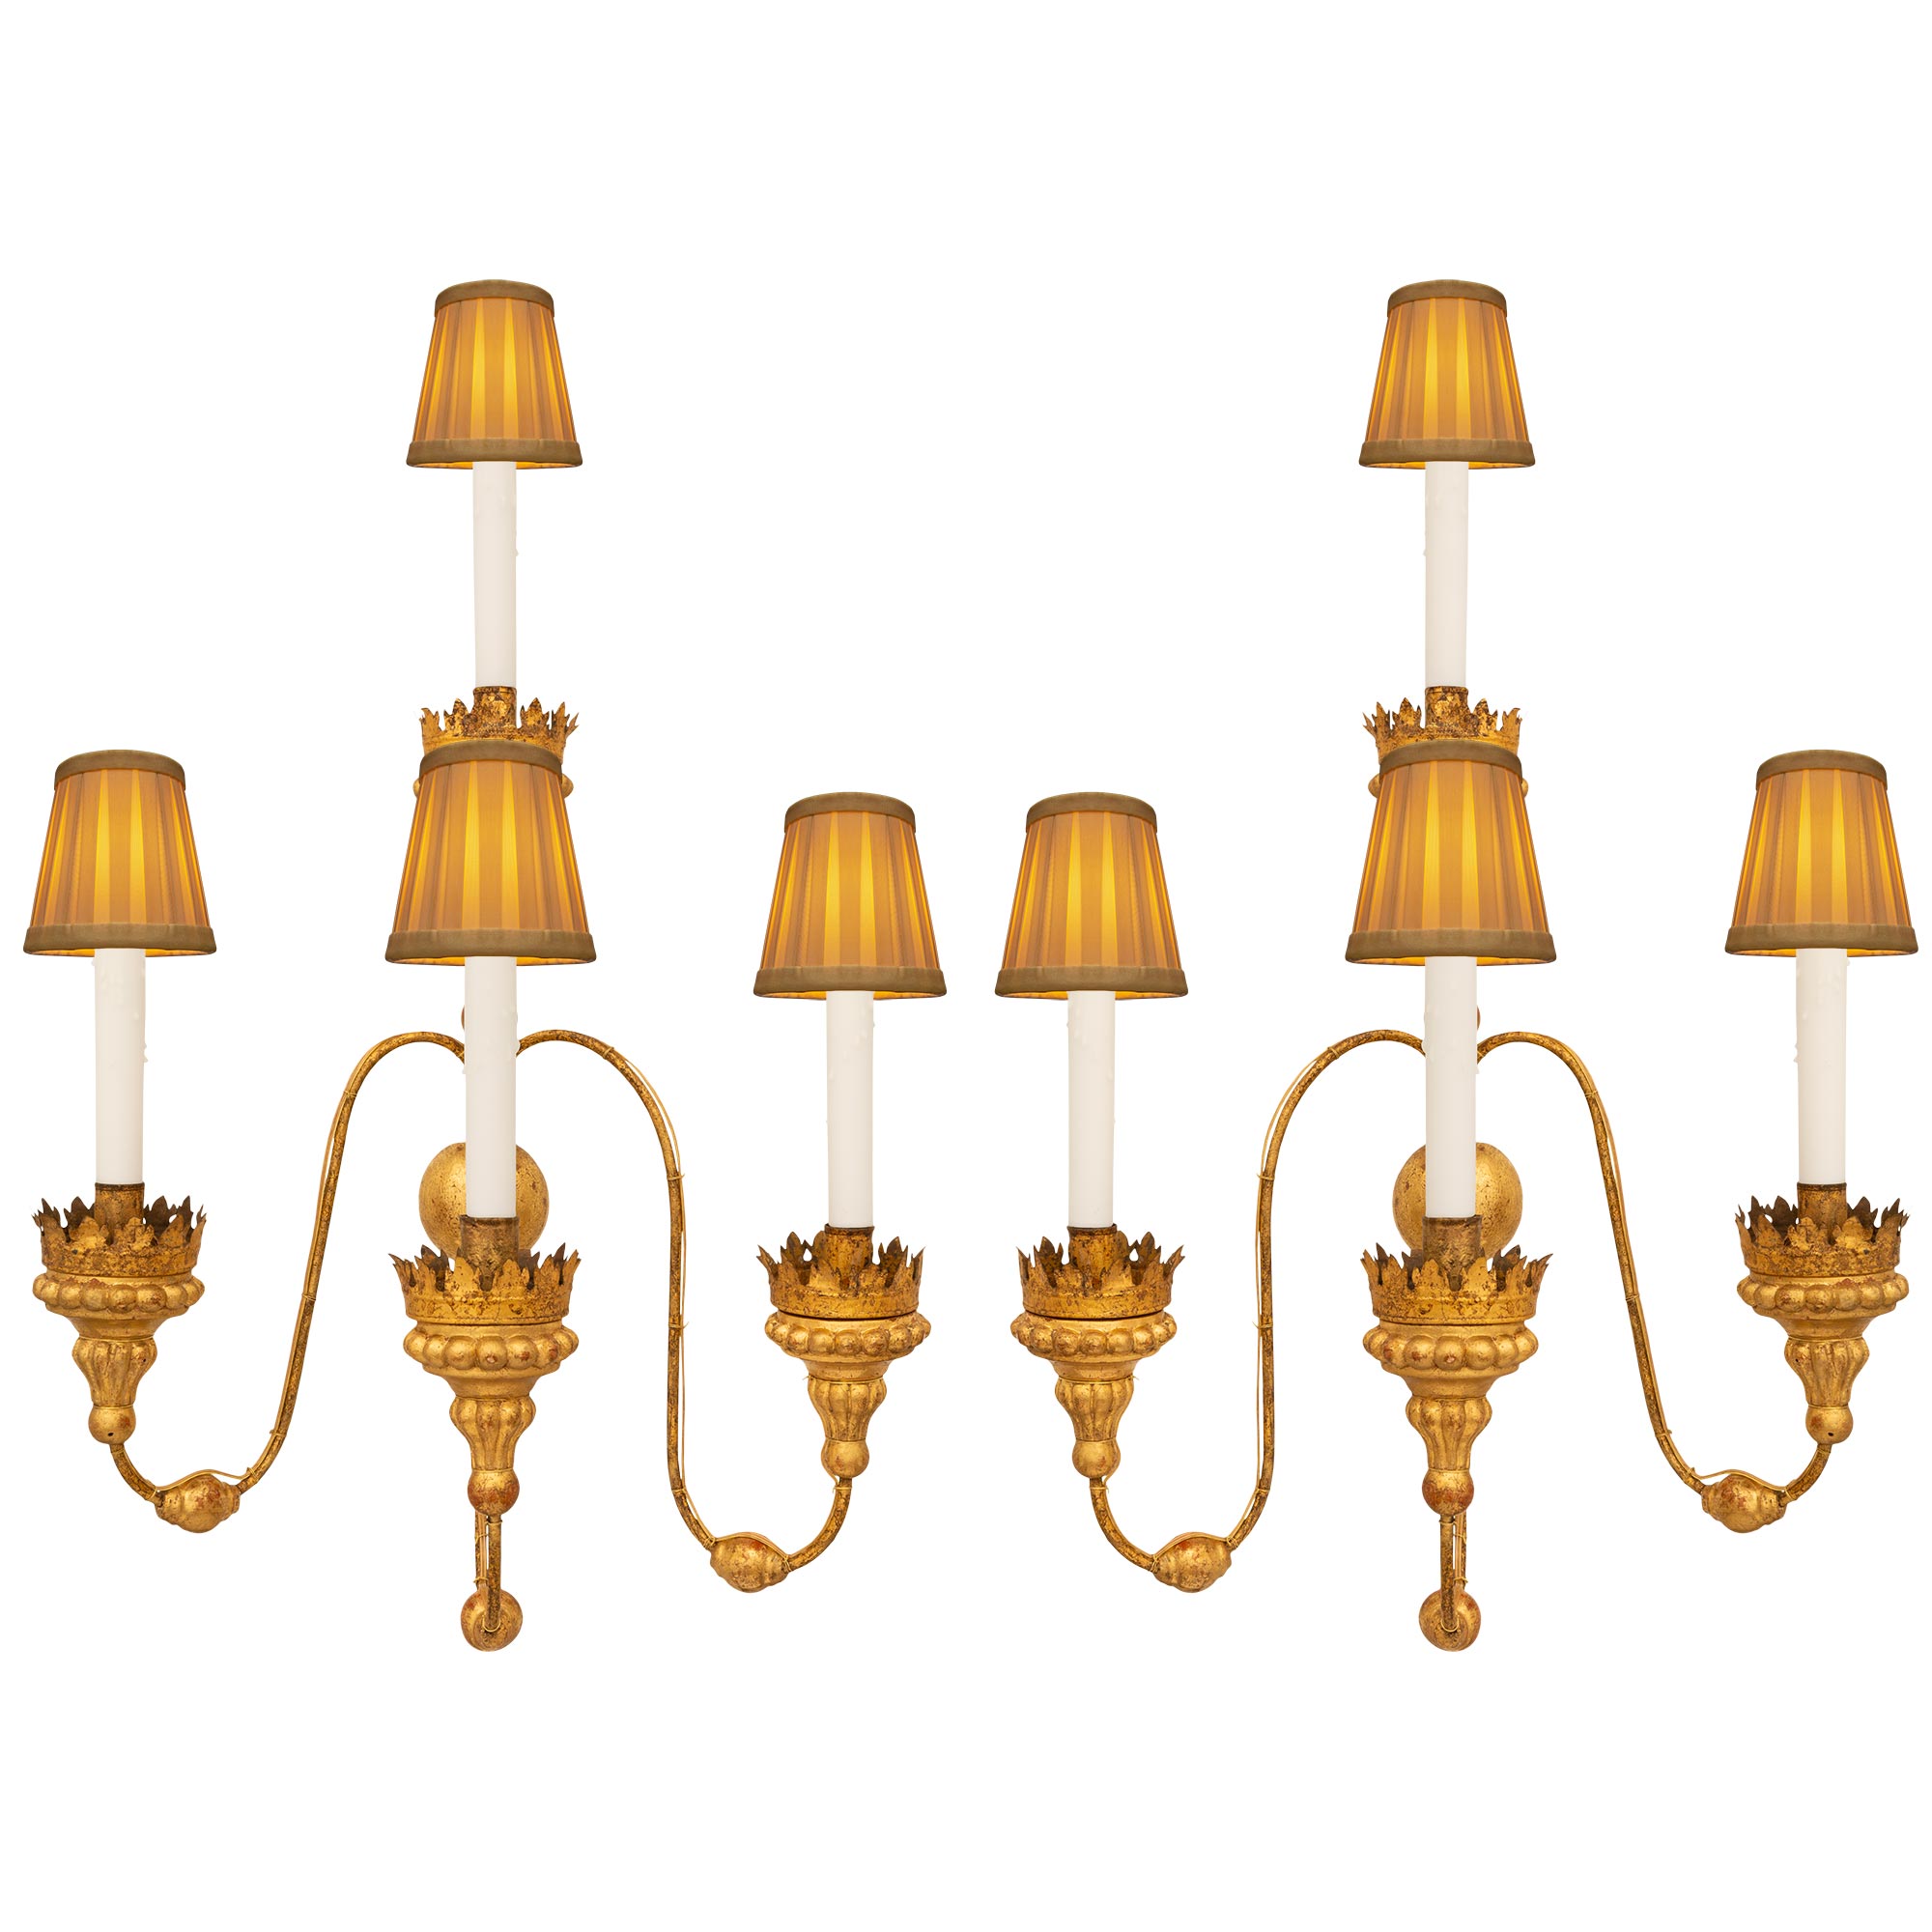 Pair Of Italian 19th Century Louis XVI St. Gilt Metal And Giltwood Sconces For Sale